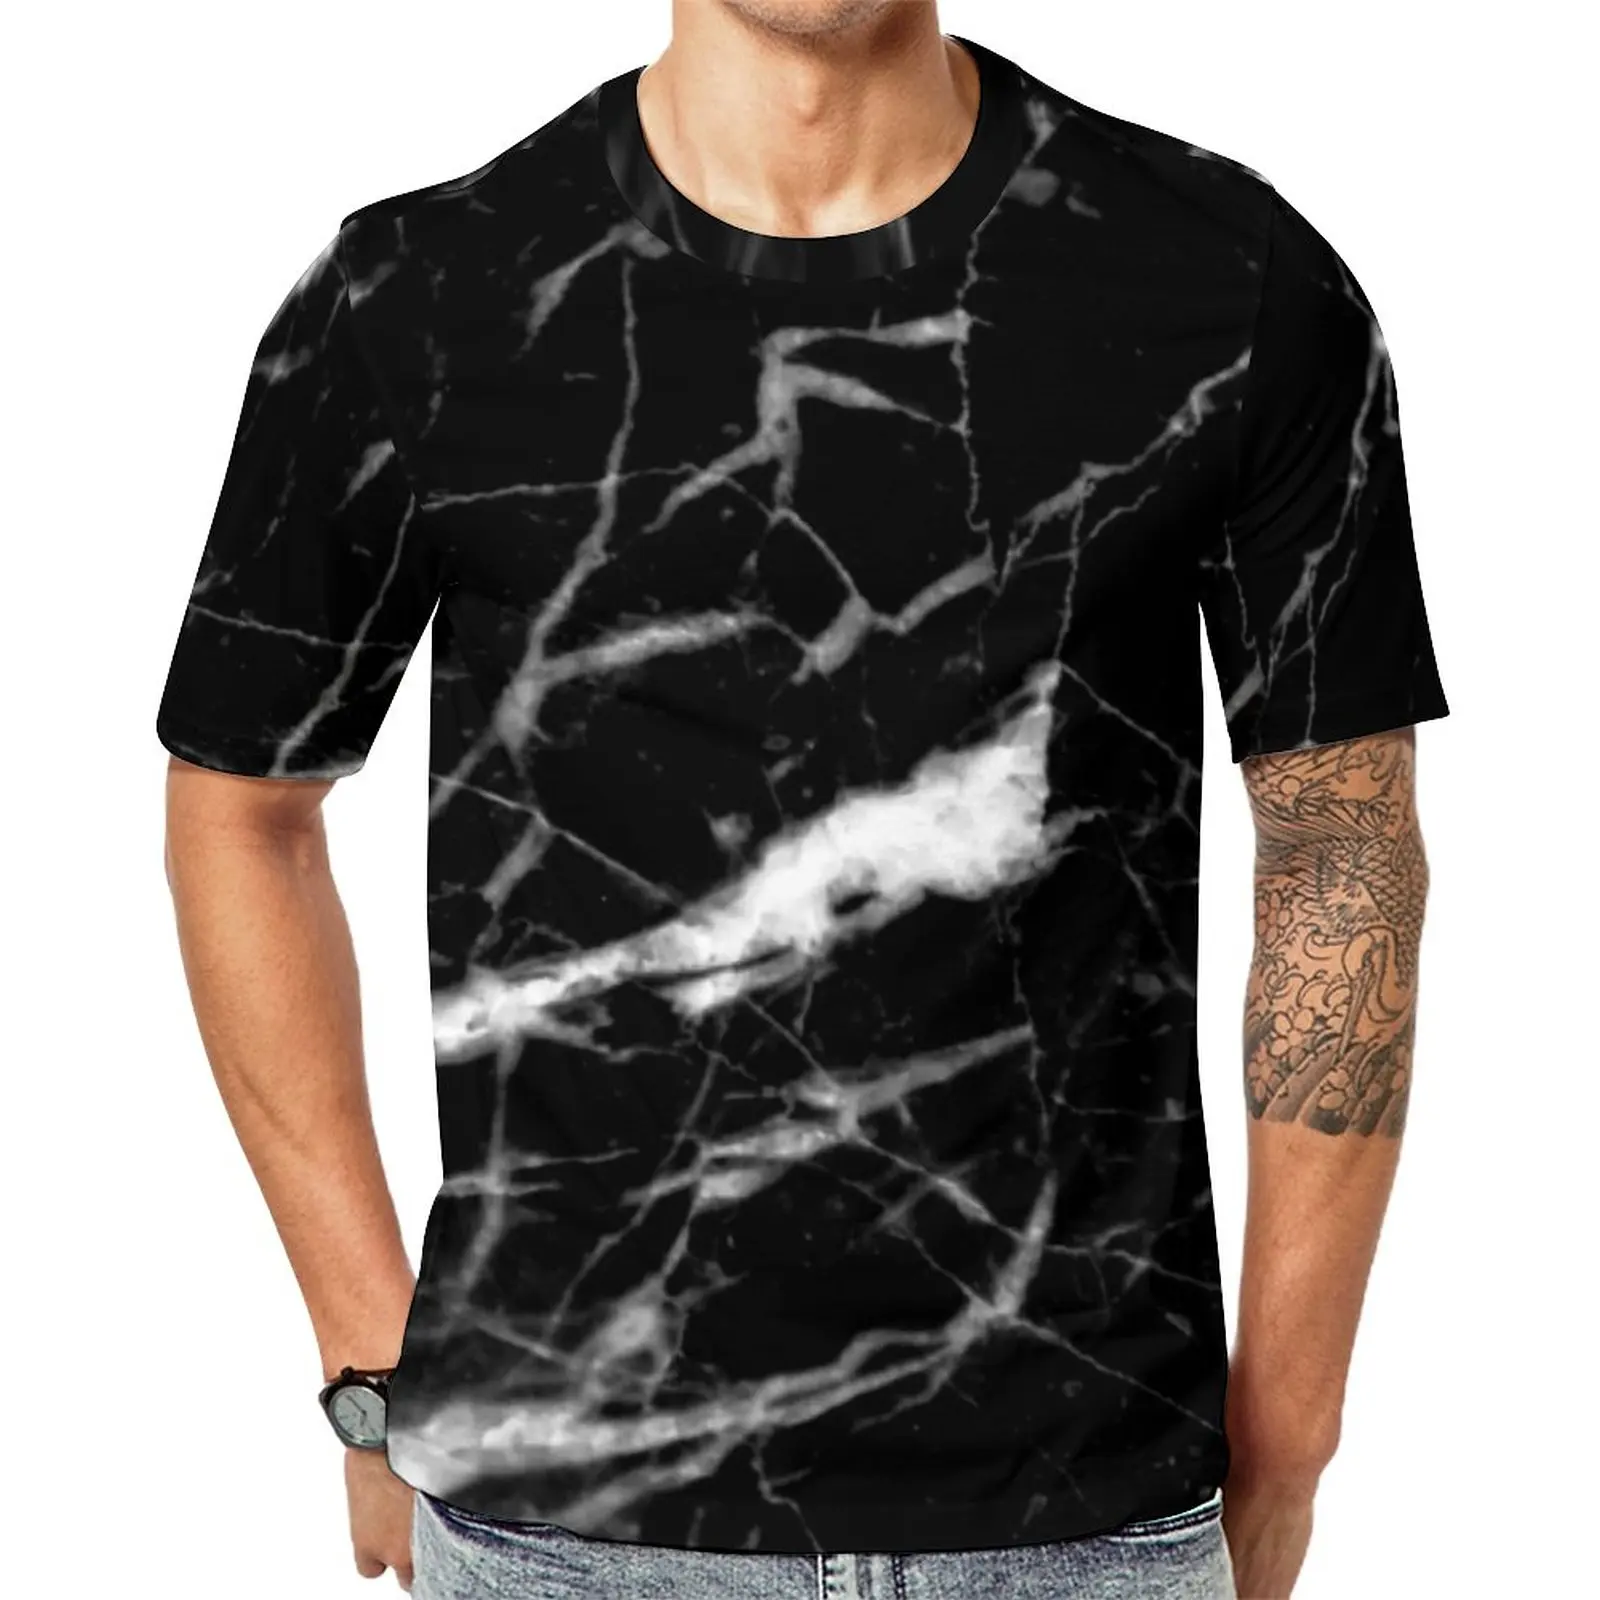 

Marble Crackle Black And White T-Shirt Natural Marbles Graphics Hippie T-Shirts Short Sleeve Graphic Tops EMO Plus Size Clothing